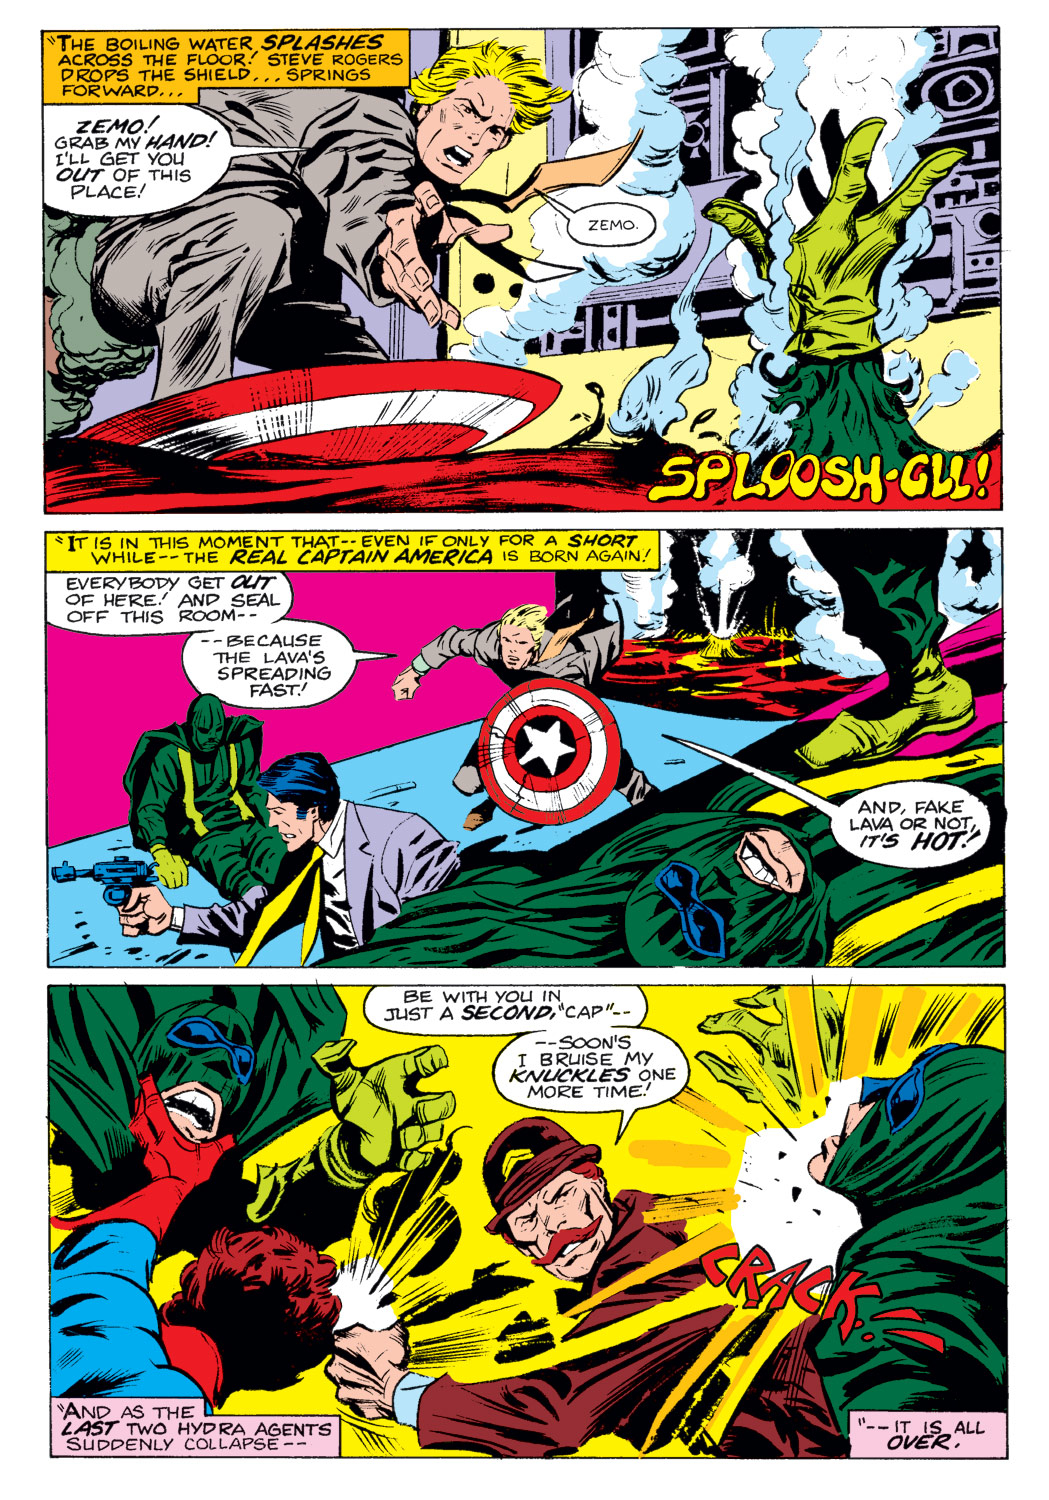 What If? (1977) Issue #5 - Captain America hadn't vanished during World War Two #5 - English 29